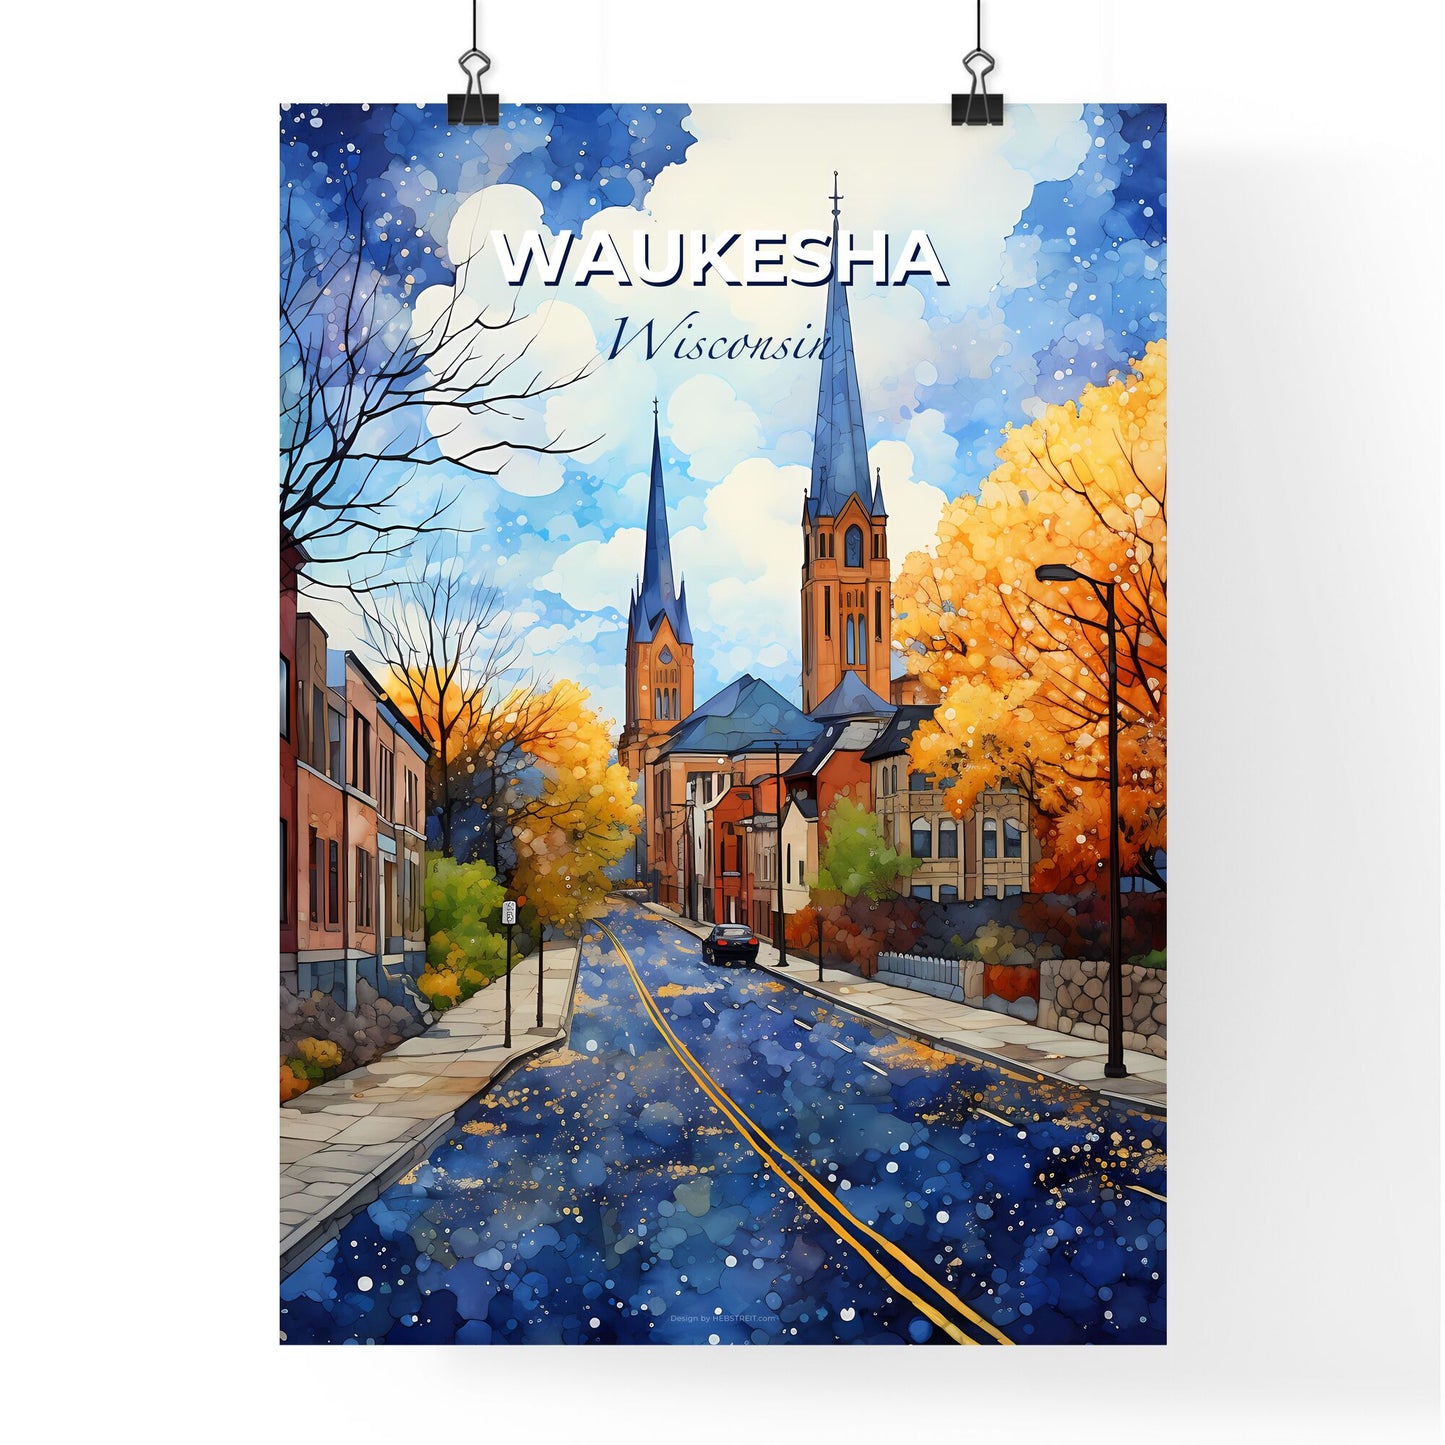 Waukesha, Wisconsin, A Poster of a street with a car on it Default Title